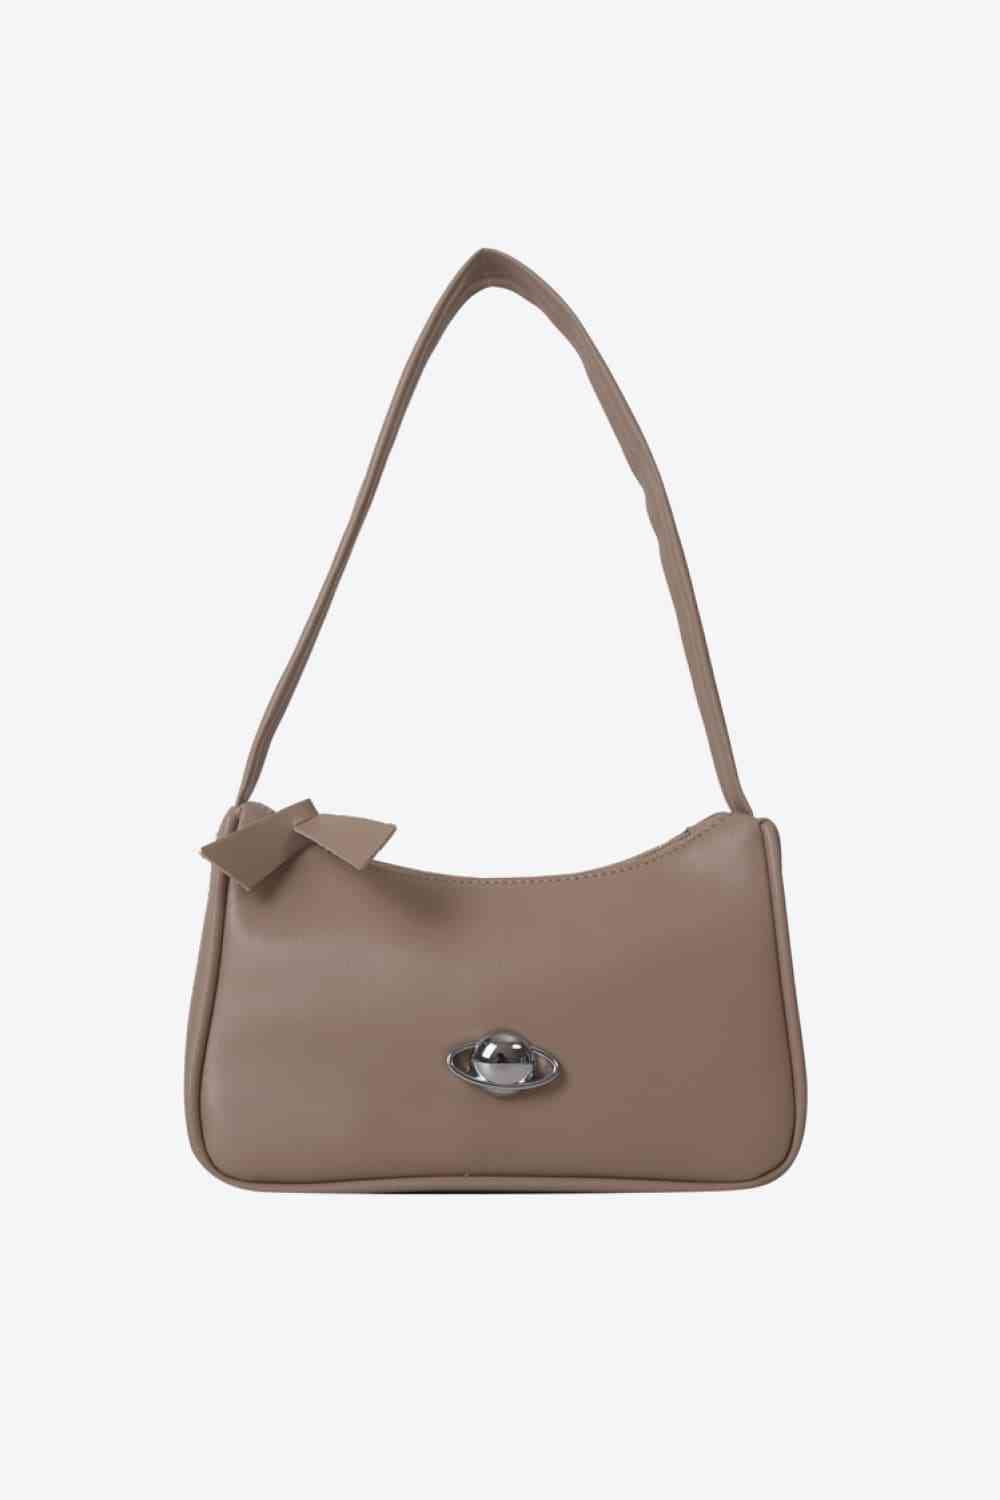 PU Leather Shoulder Bag - Khaki / One Size - All Products - Handbags - 9 - 2024